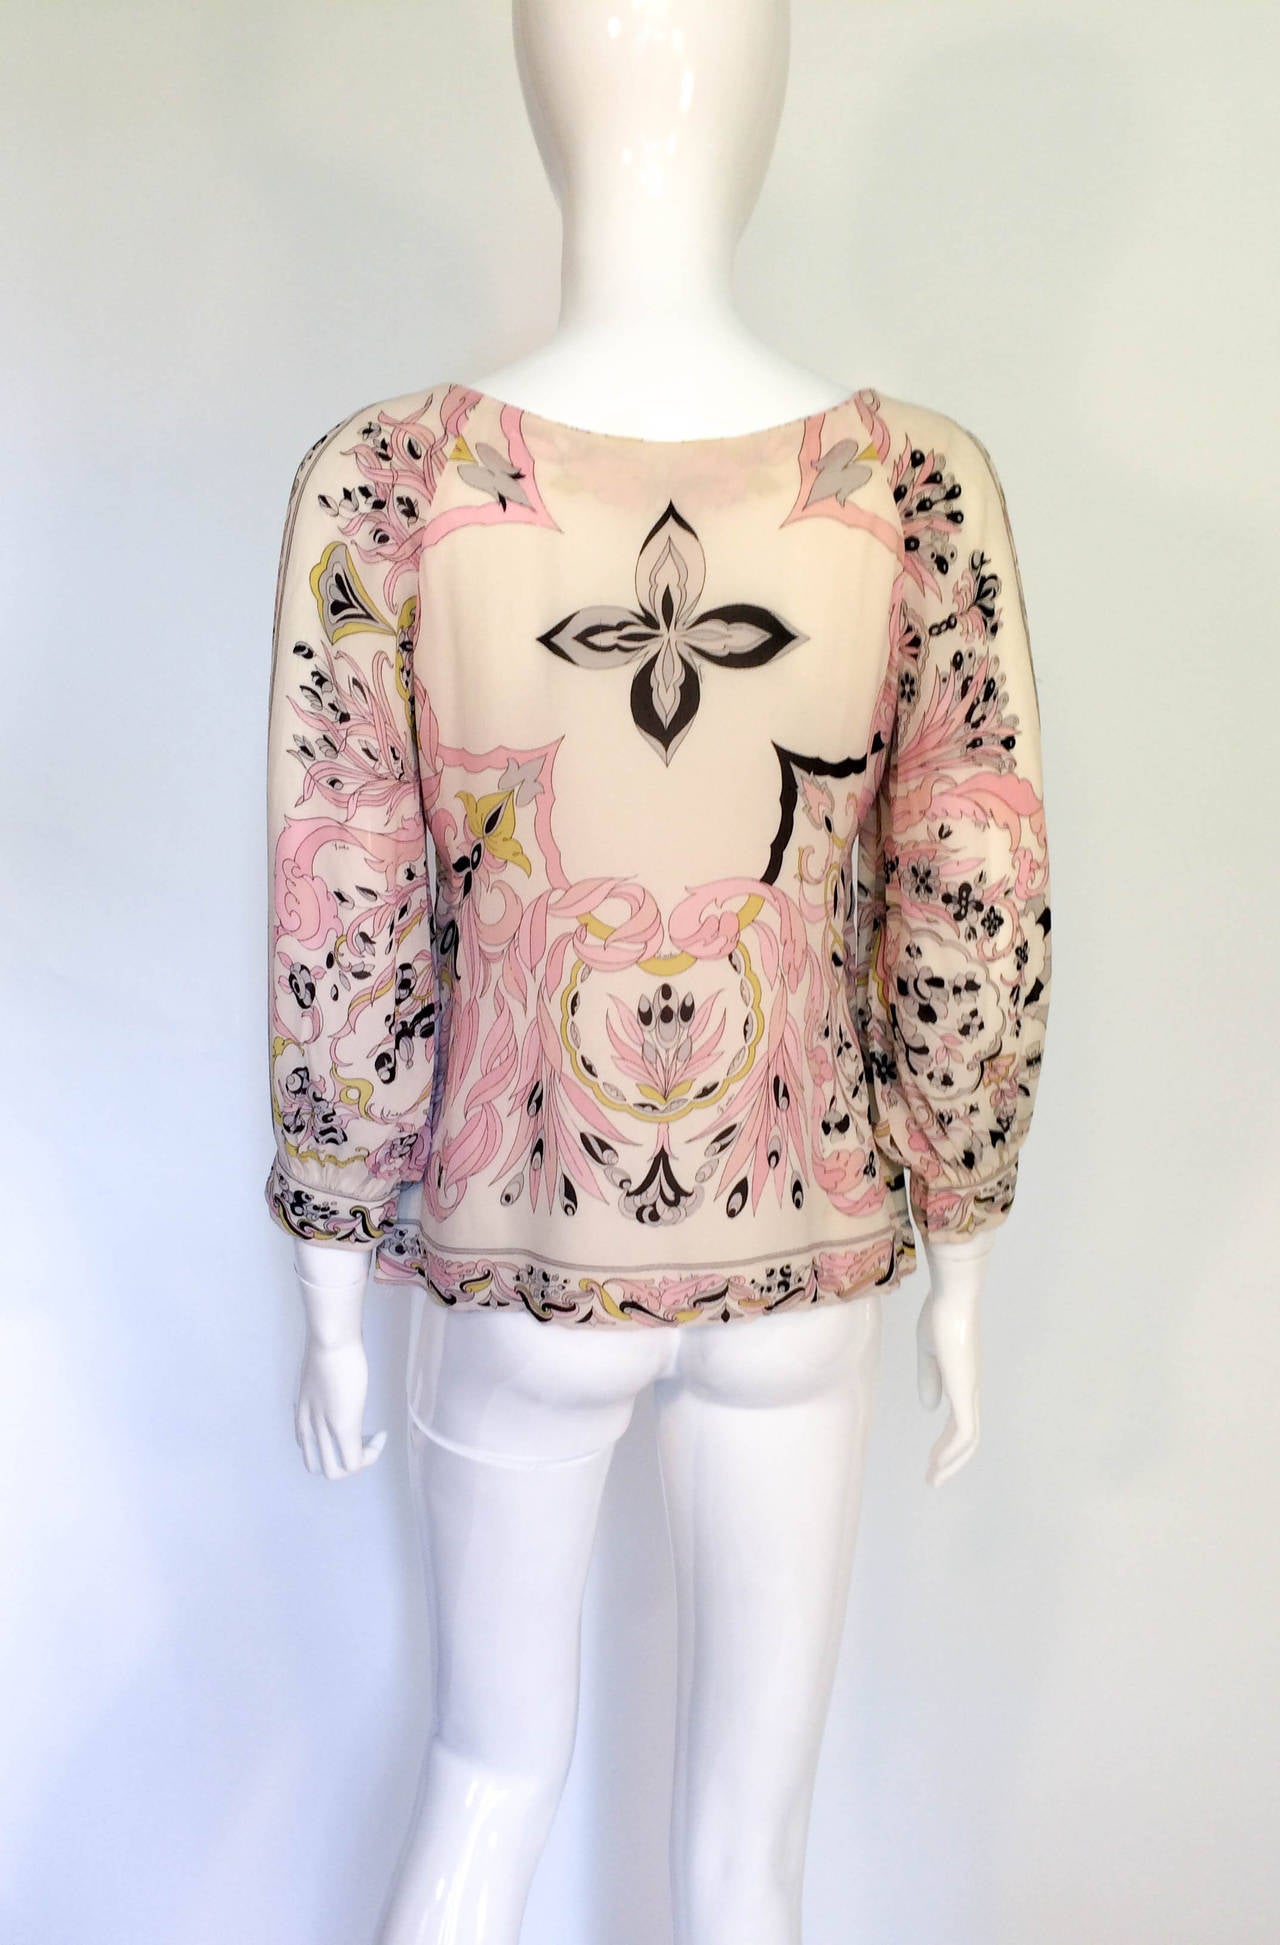 Emilio Pucci Silk Blouse - 1960s at 1stdibs